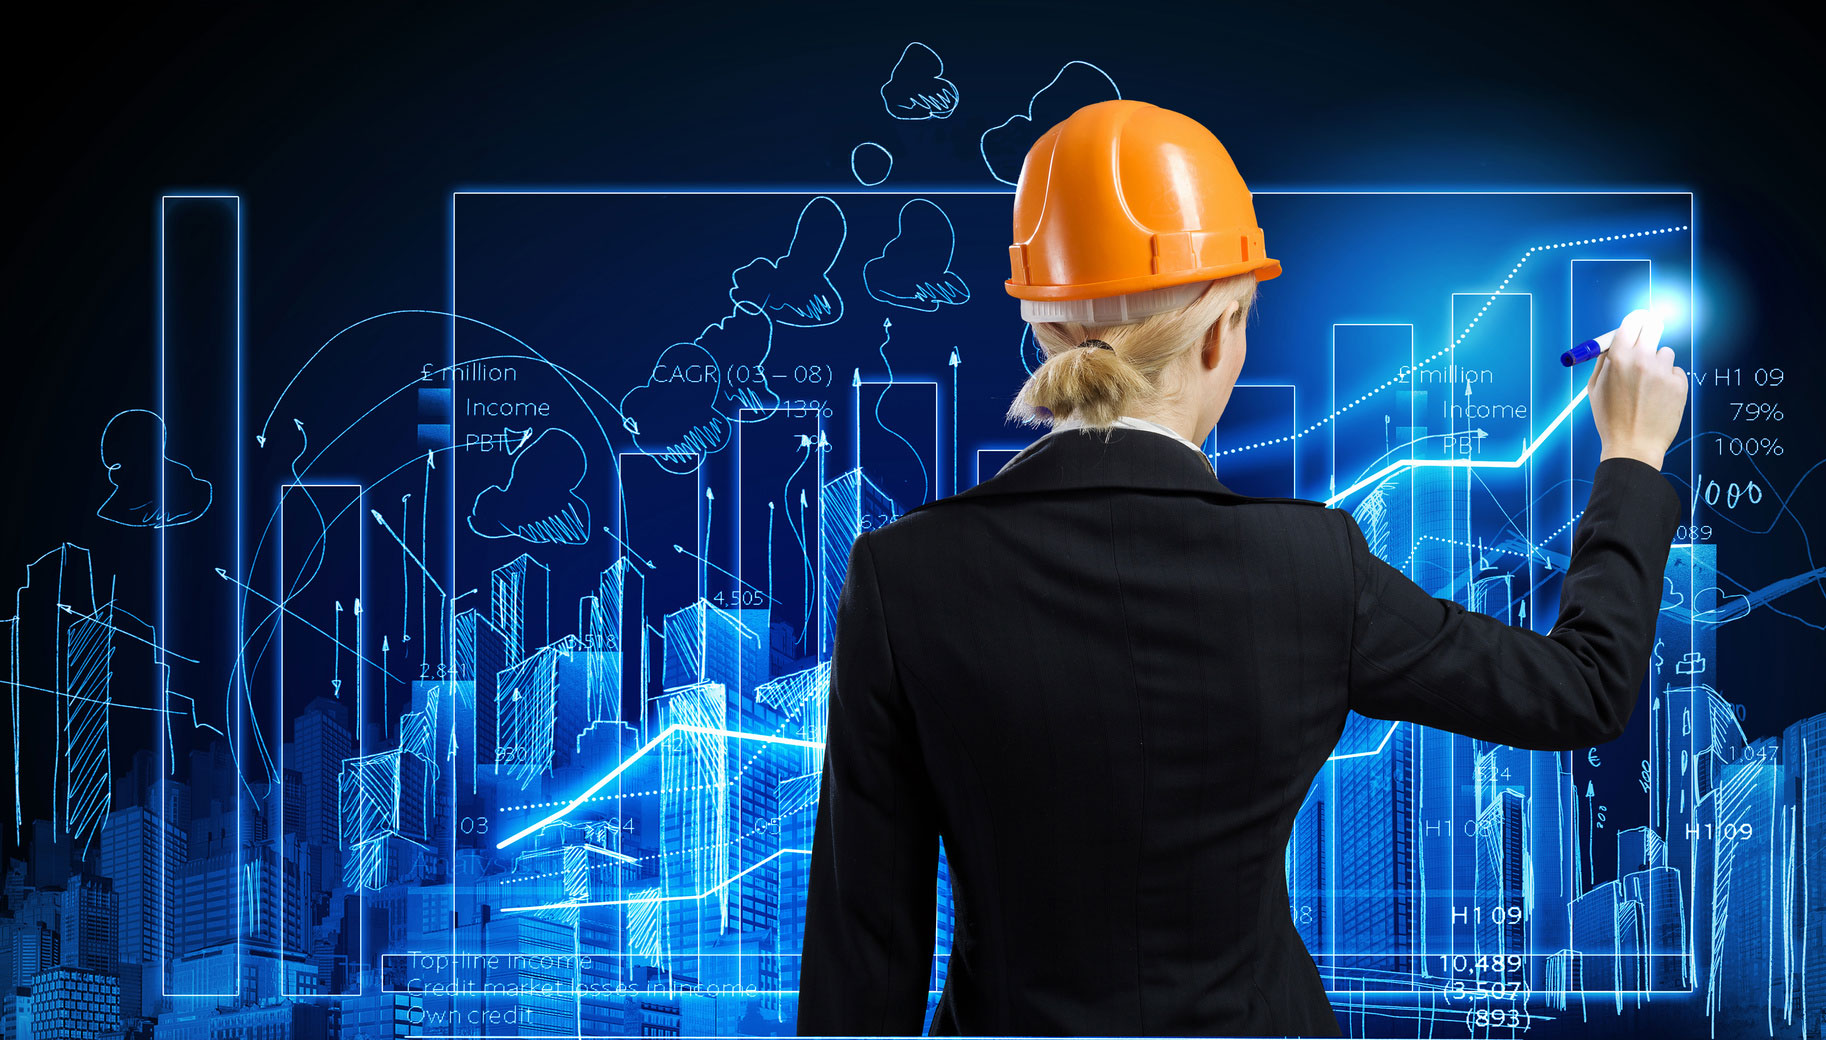 Should construction companies learn from their in-house data?